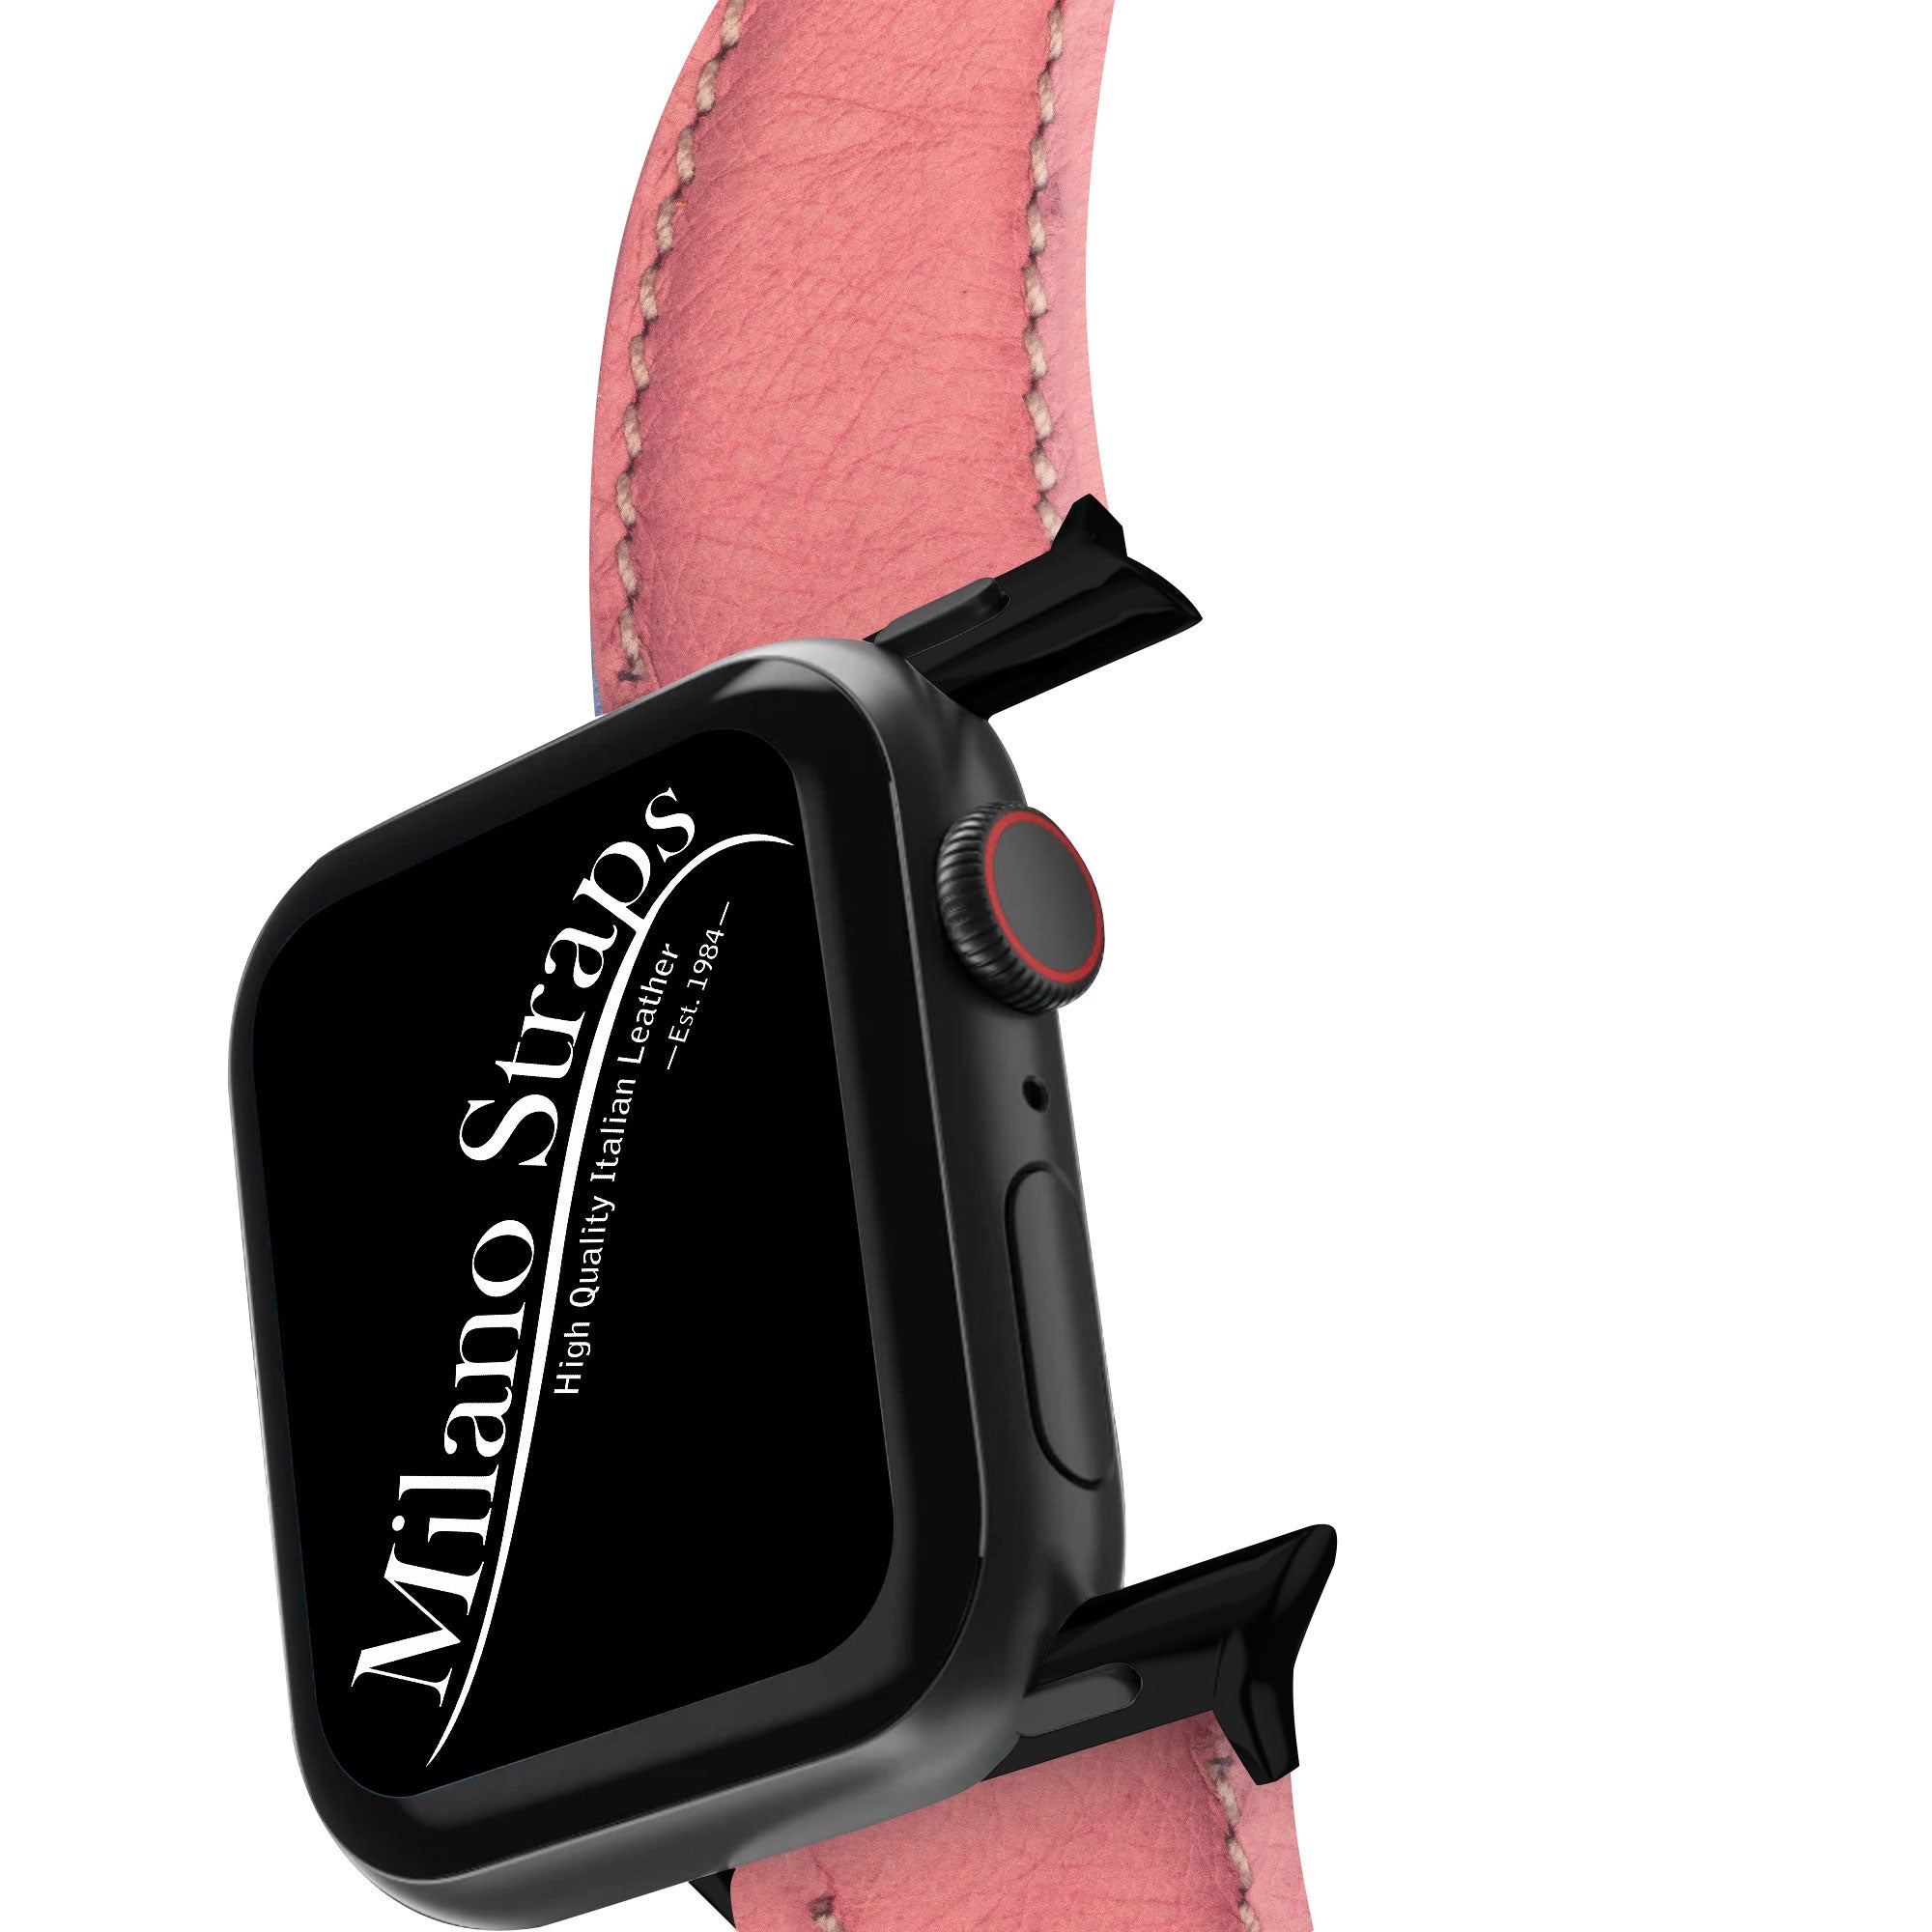 Apple Watch Leather Band ™ Pink Ostrich Leather Strap - Milano Straps